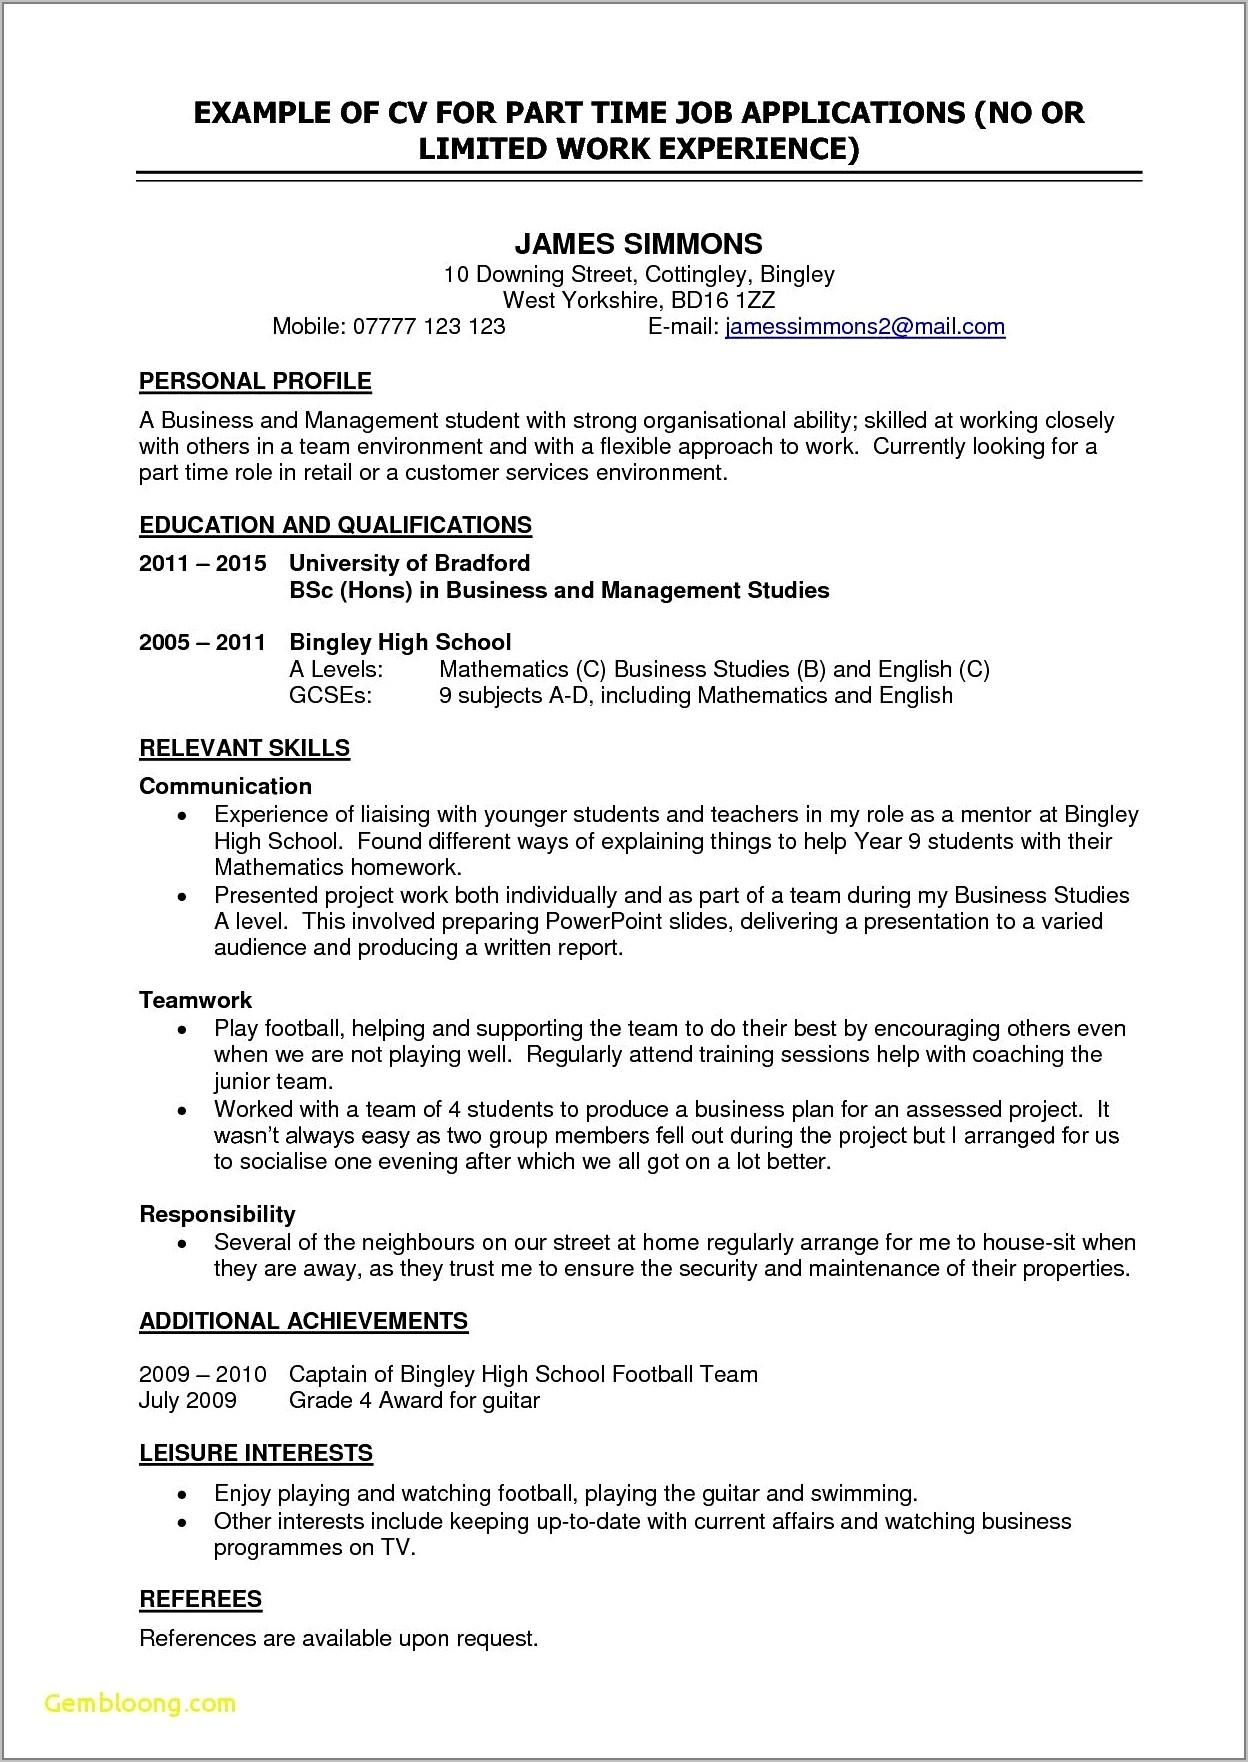 Resume Examples For Jobs 2015